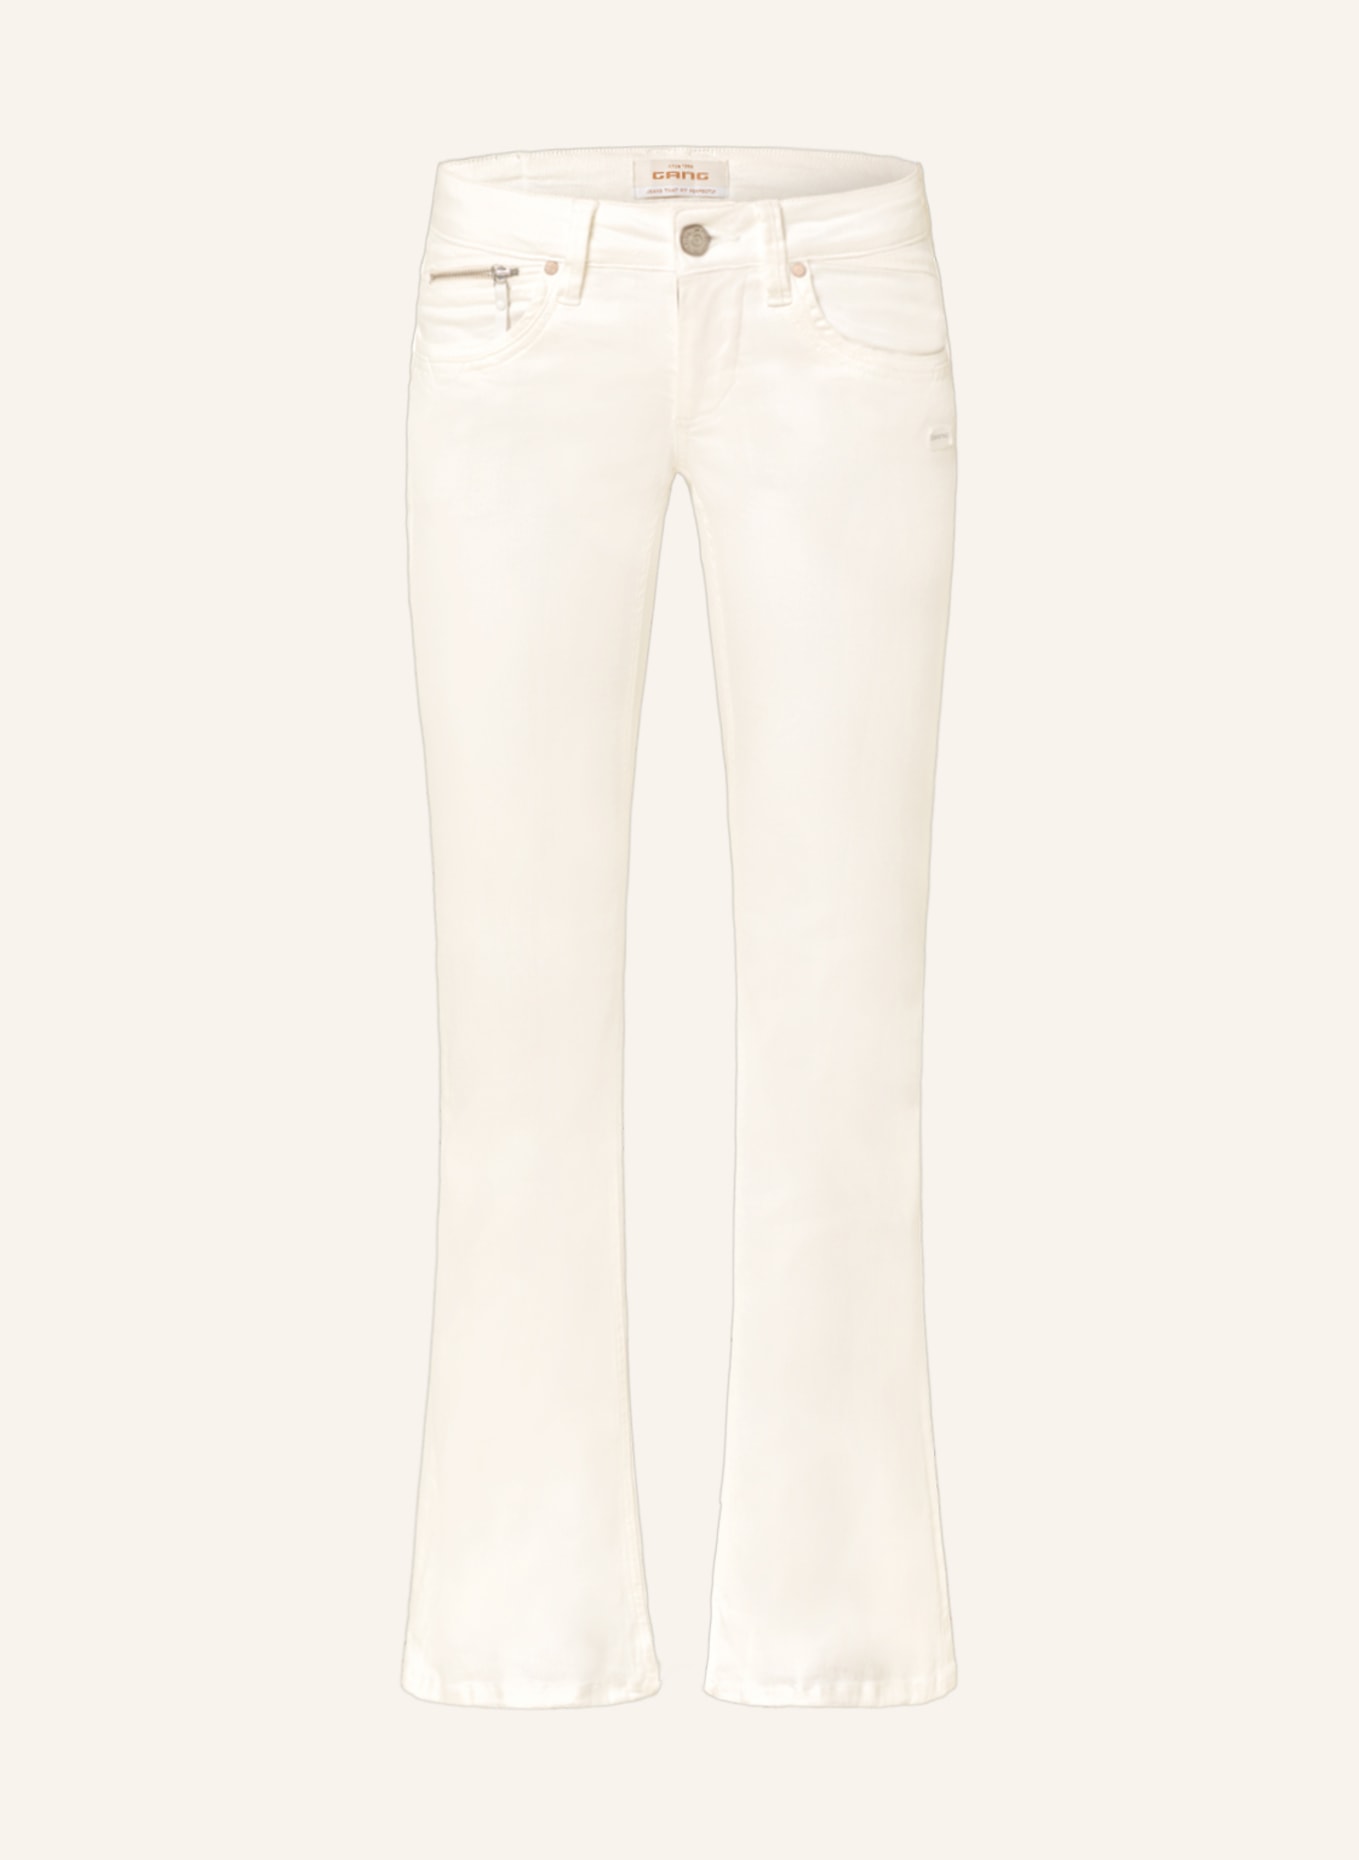 GANG Bootcut Jeans 94 NICITA, Color: 6008 offwhite(Image null)